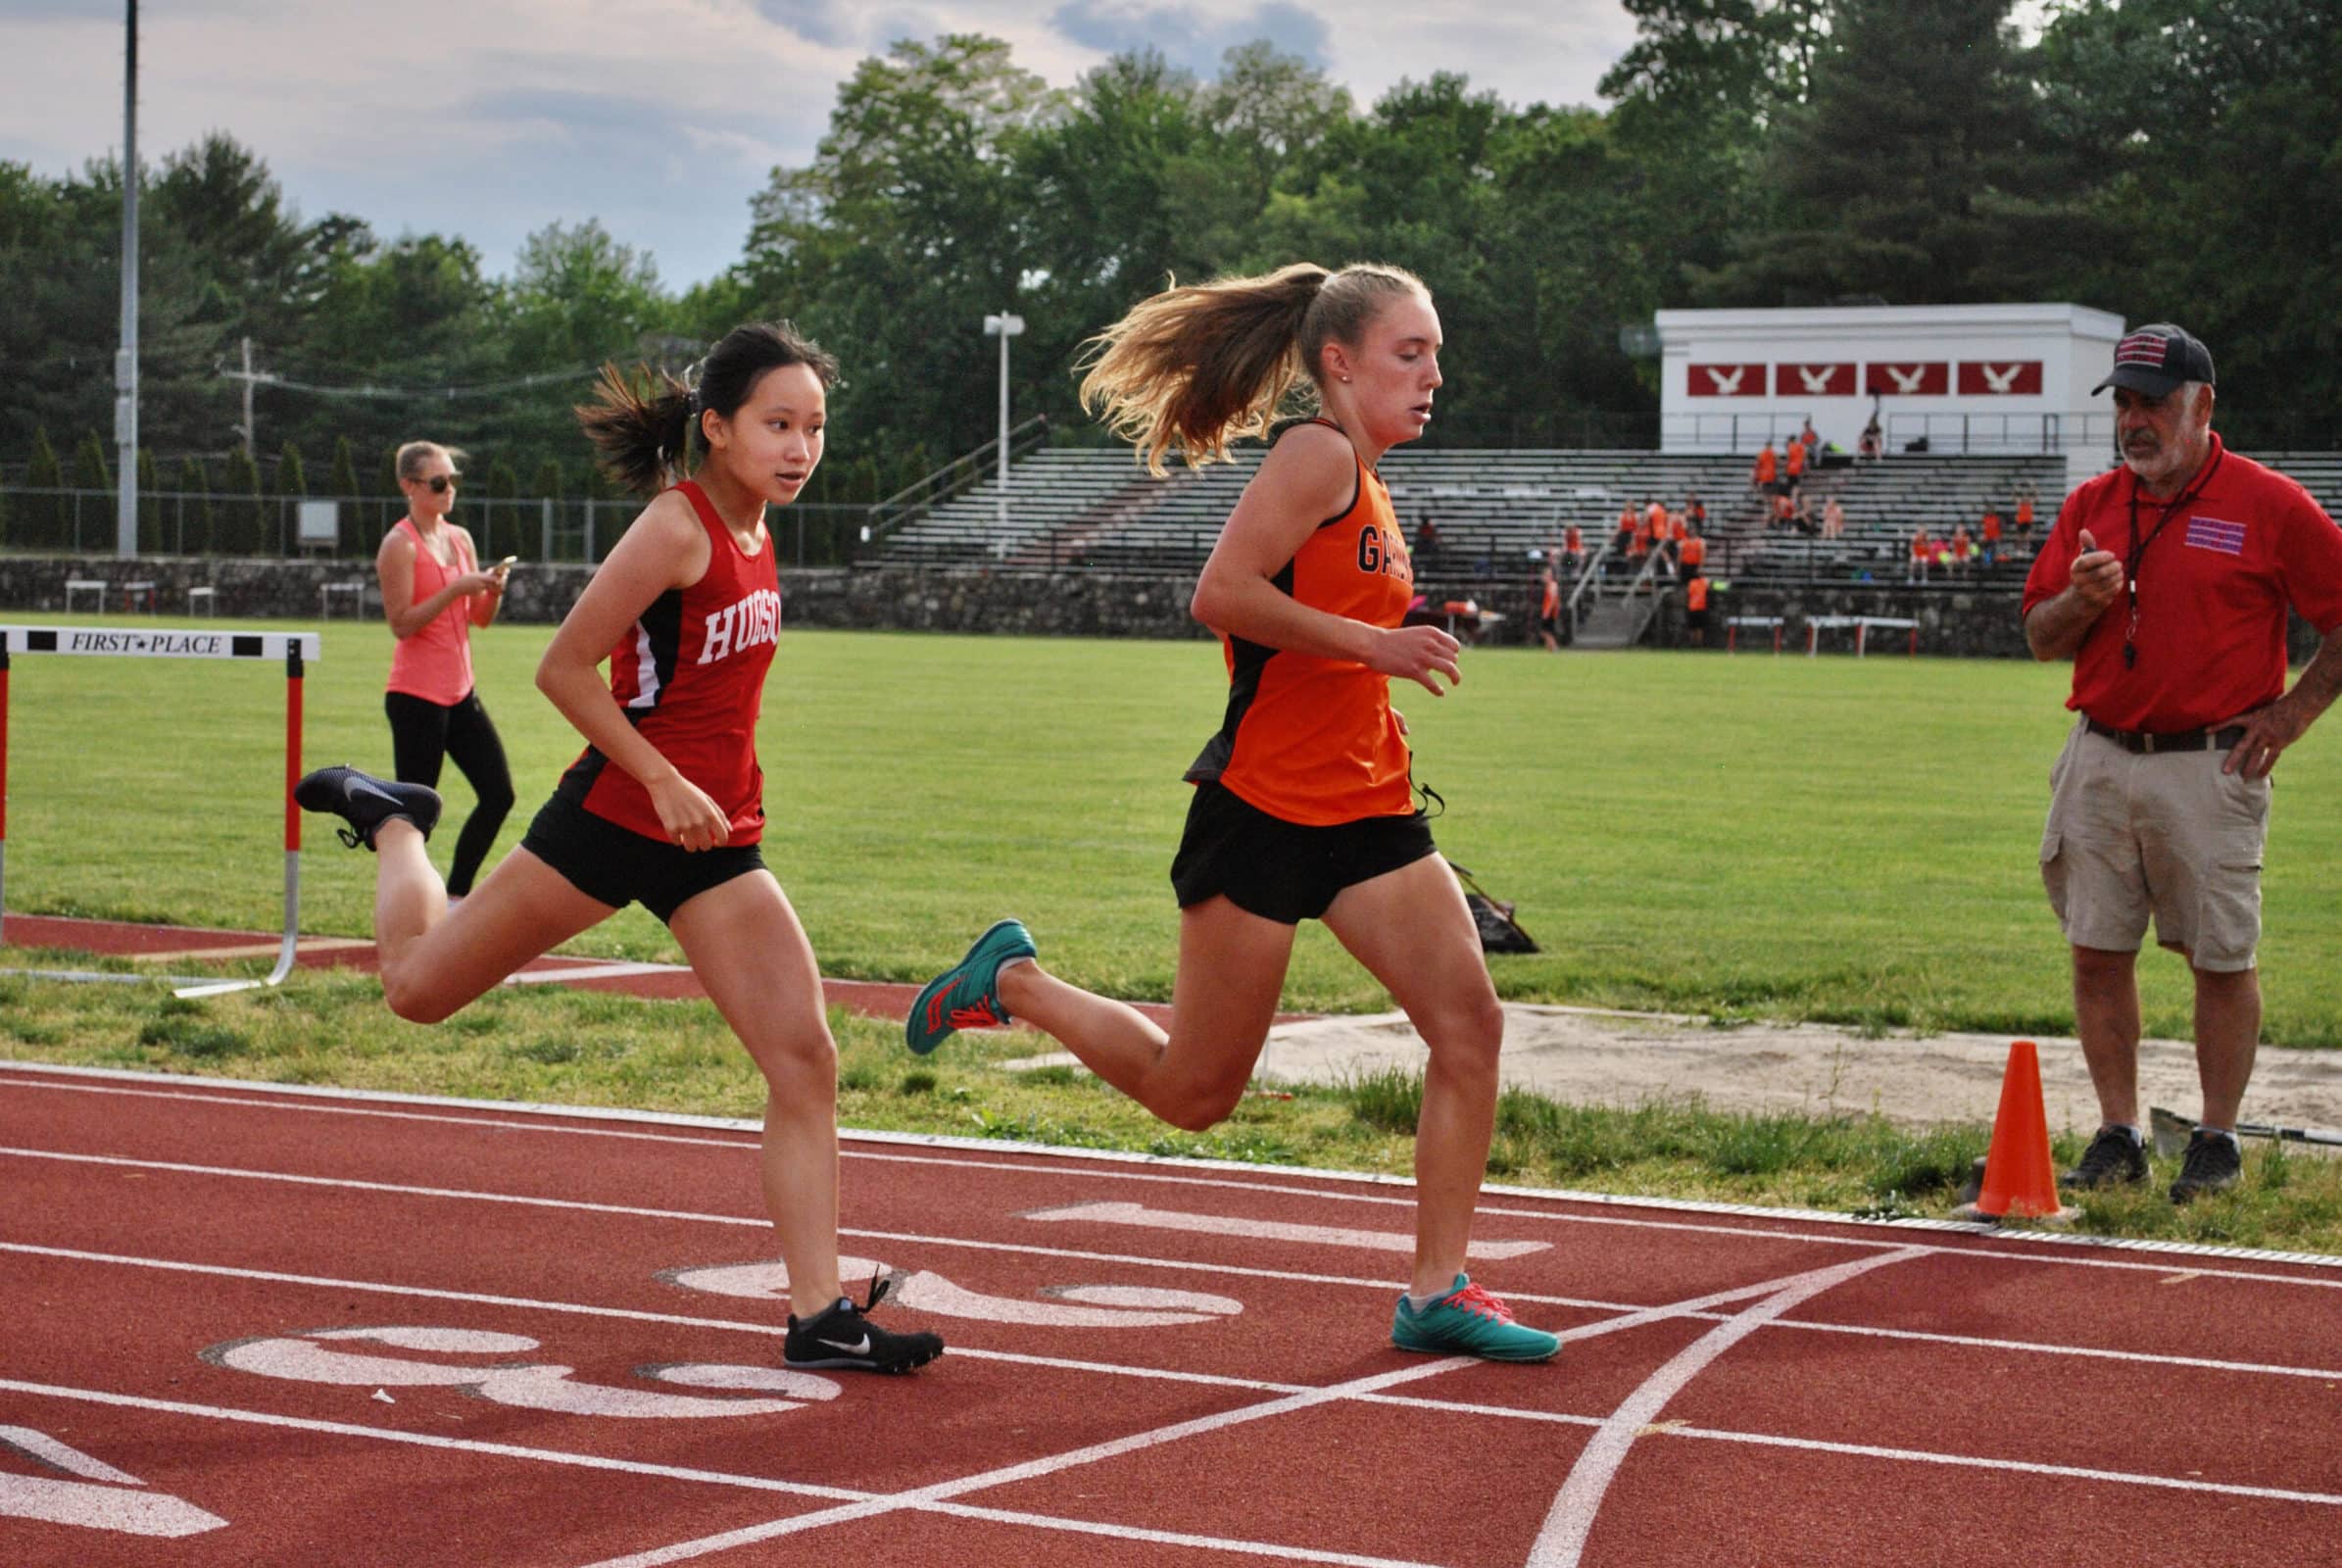 Dramatic relay punctuates final HHS home track meet of 2021